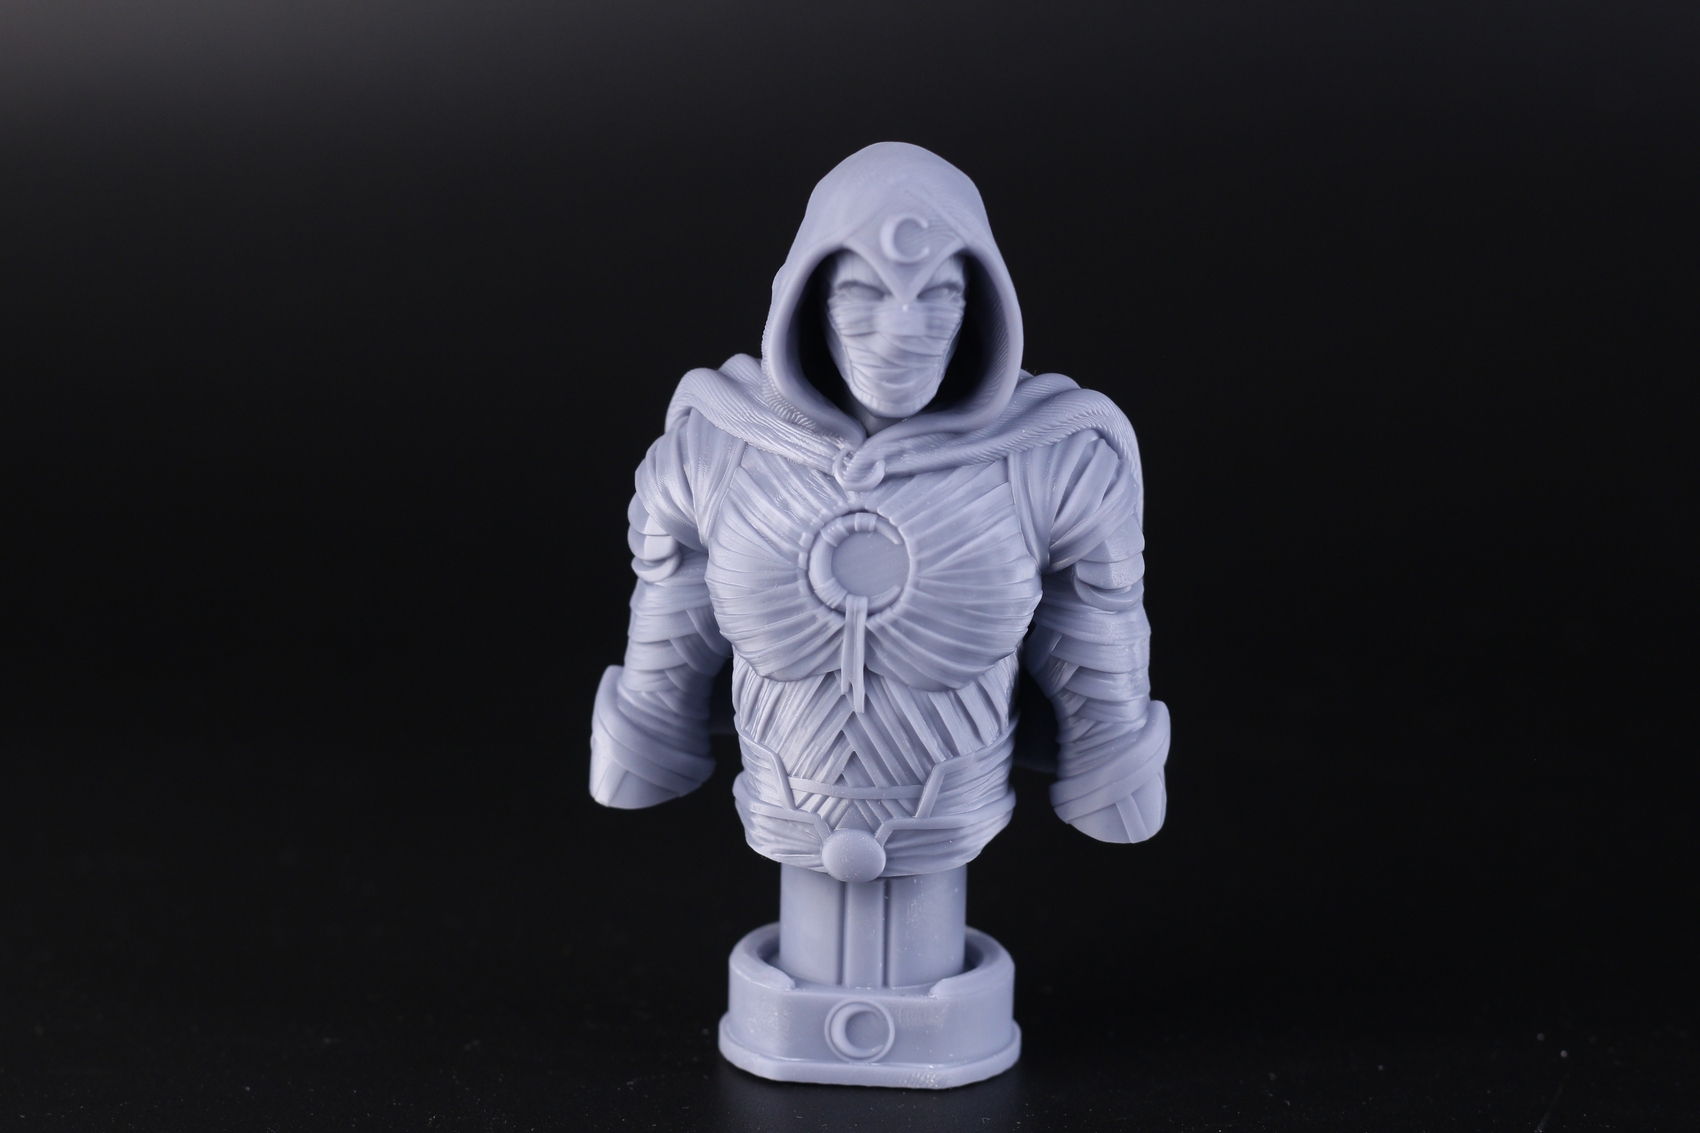 Moon Knight Bust Anycubic Photon M3 Review1 | Anycubic Photon M3 Review: Bridging the gap